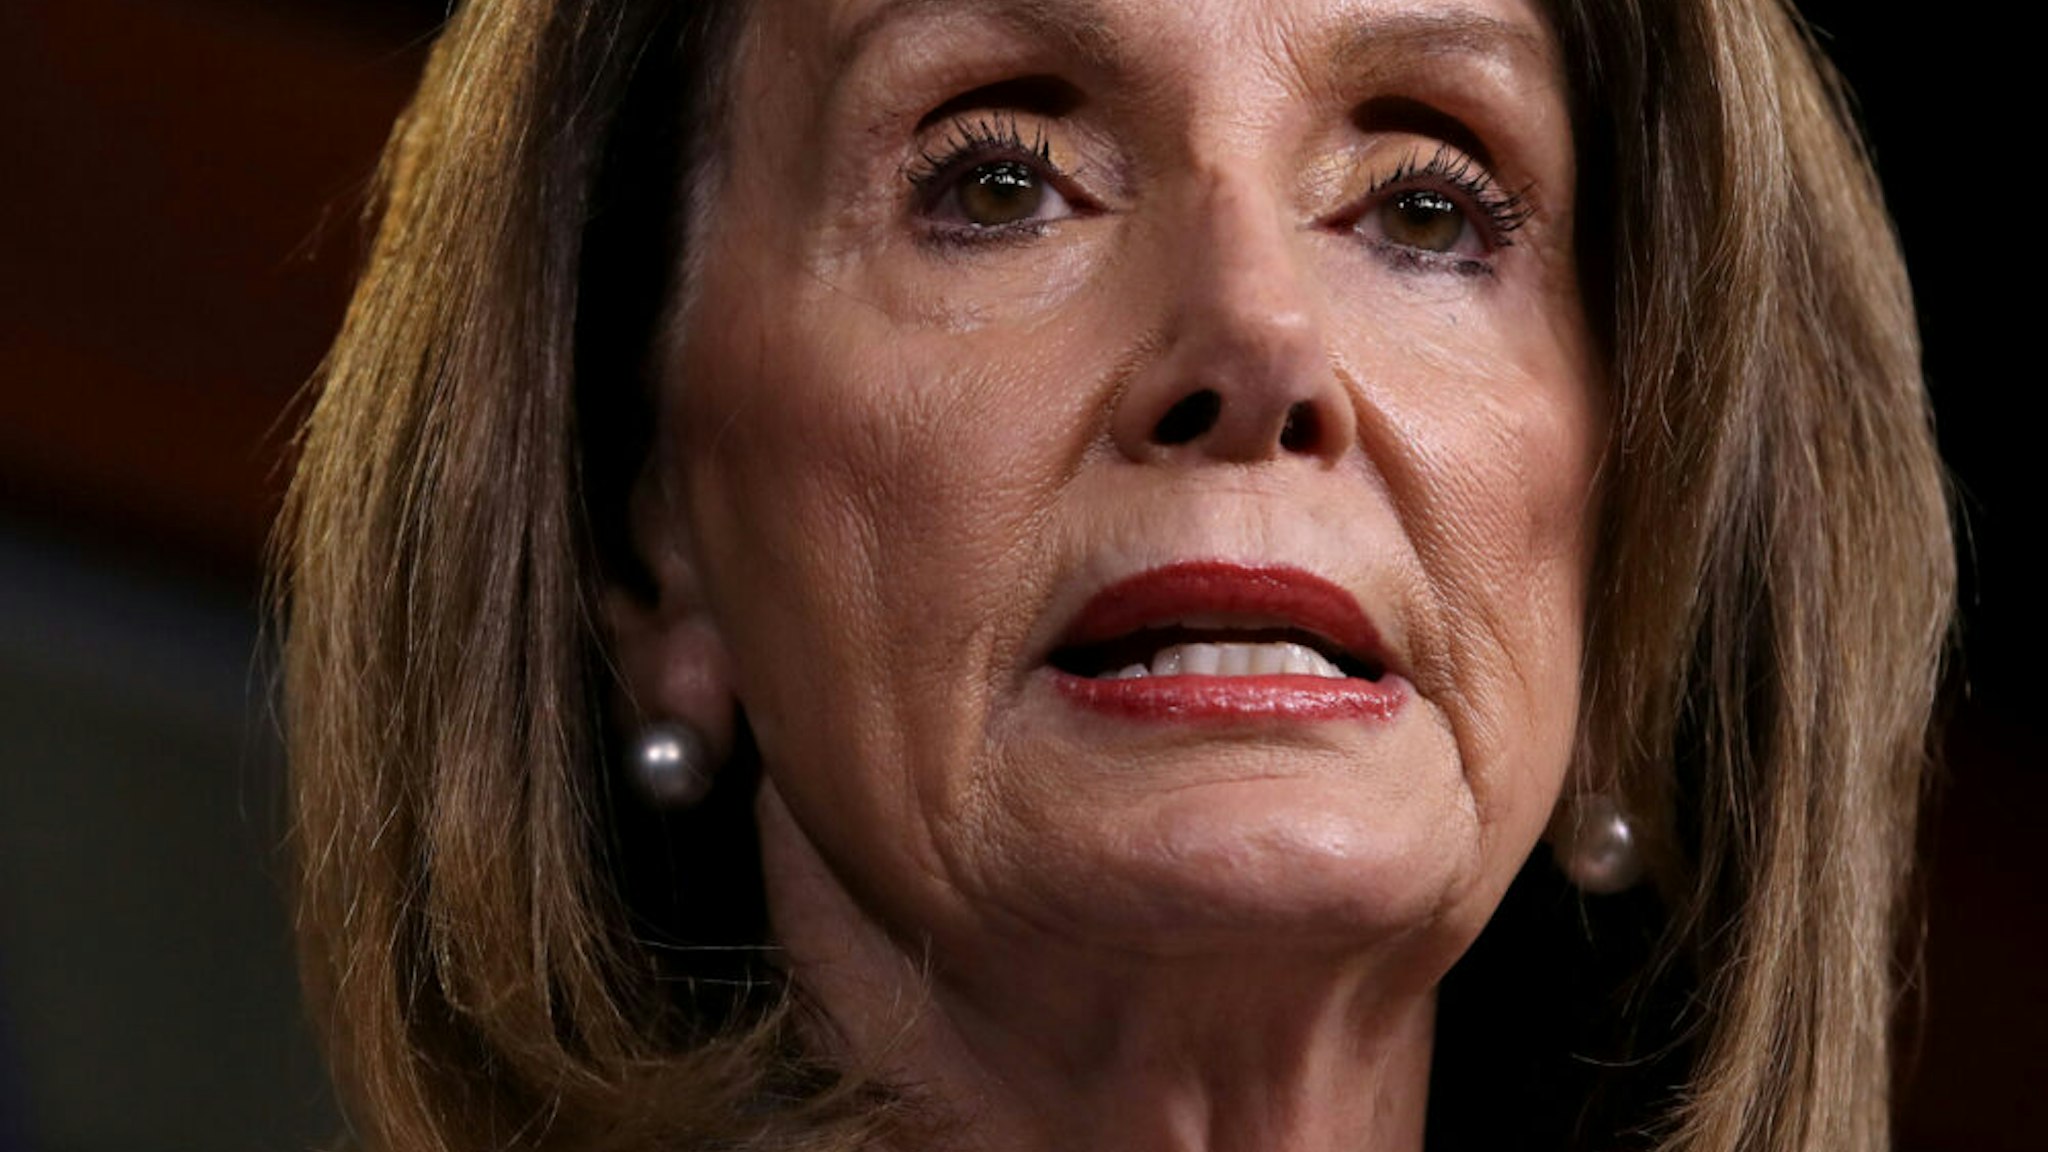 WASHINGTON, DC - MAY 09: U.S. Speaker of the House Nancy Pelosi (D-CA) answers questions during a press conference at the U.S. Capitol on May 09, 2019 in Washington, DC. During the press conference Pelosi said the U.S. is in a "constitutional crisis" and warned that House Democrats may find additional members of the Trump administration in contempt of congress for not complying with congressional subpoenas.